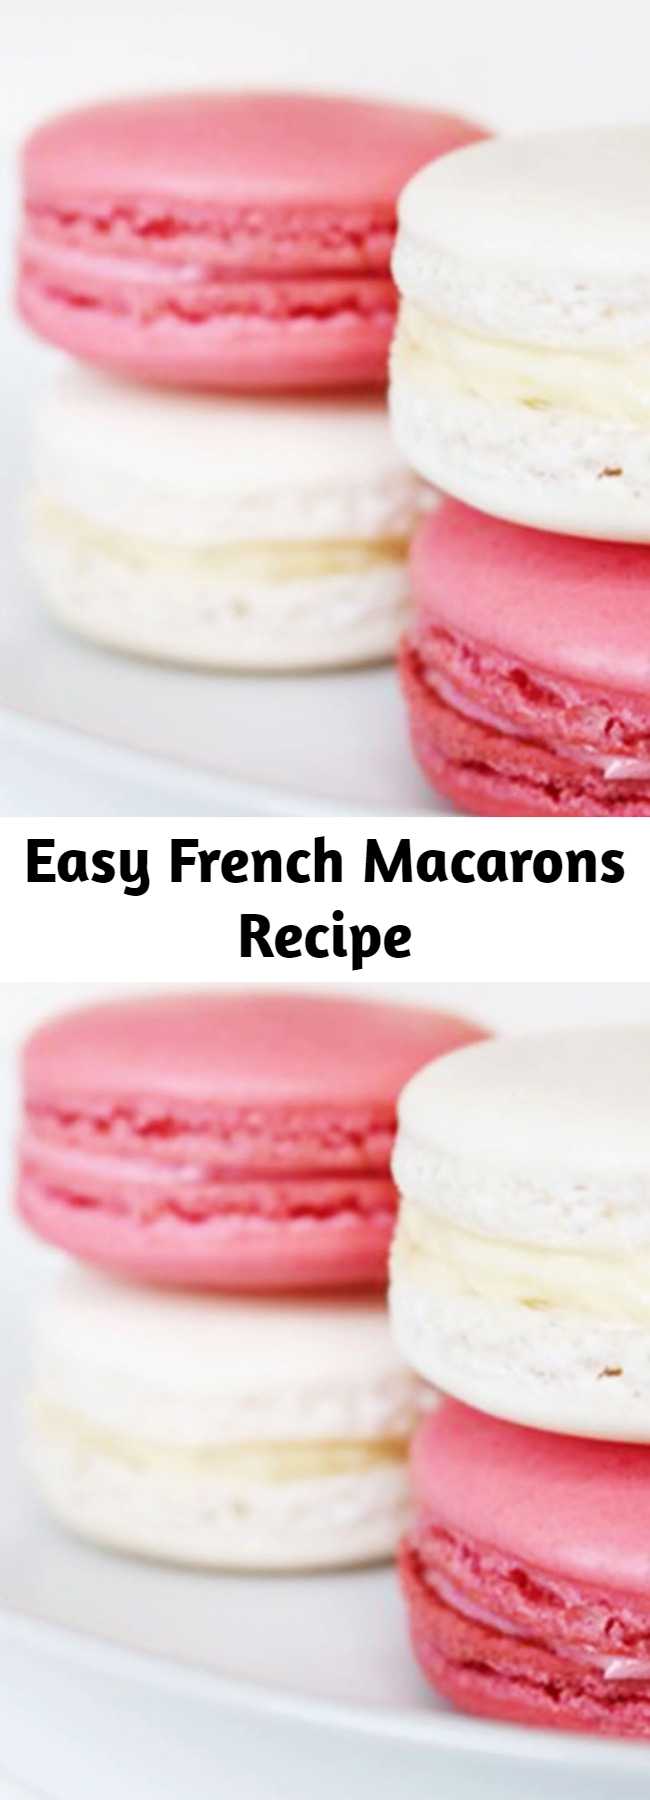 Easy French Macarons Recipe - These charming little cookies have become a total dessert craze thanks to our French friends across the pond. Macarons are a sugary and delicious treat perfect for tea parties, bridal showers, and basically any festive occasion you can think of. Don't be intimidated by their seemingly difficult recipe requirements, because our guide to baking and assembling the basic French macaron is fool proof!